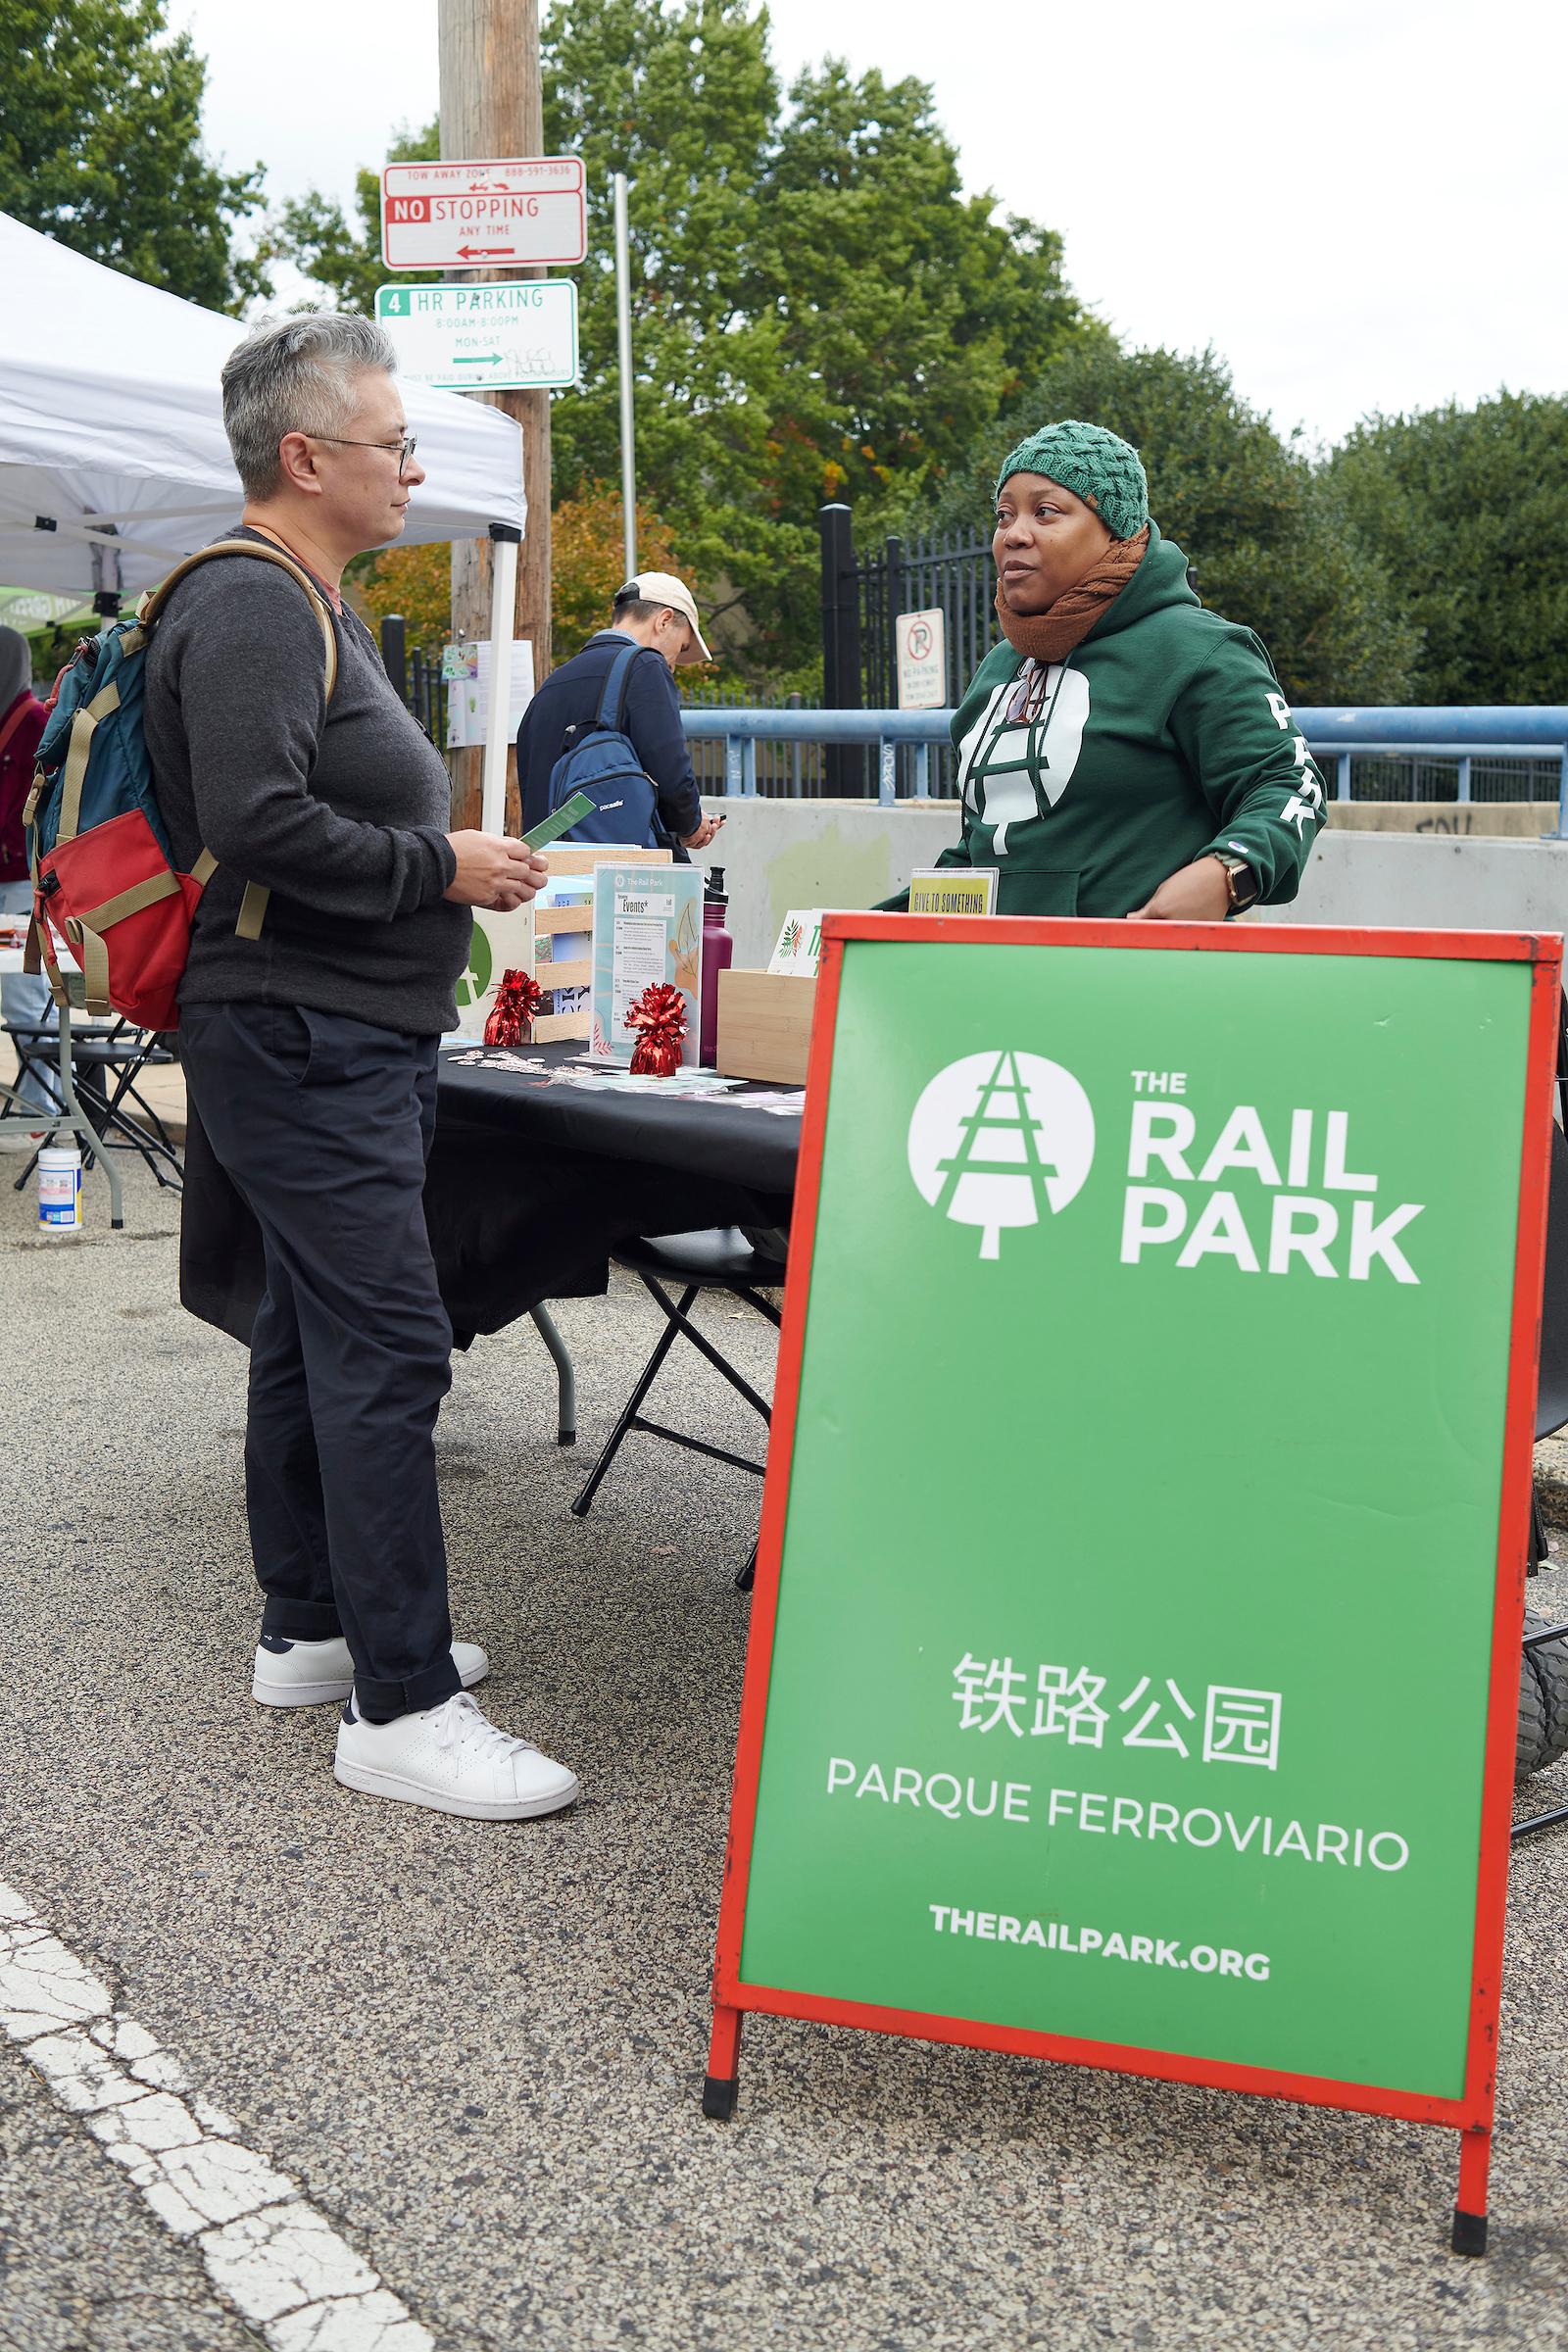 Photo courtesy of Albert Yee. People speaking at the Rail Park table.